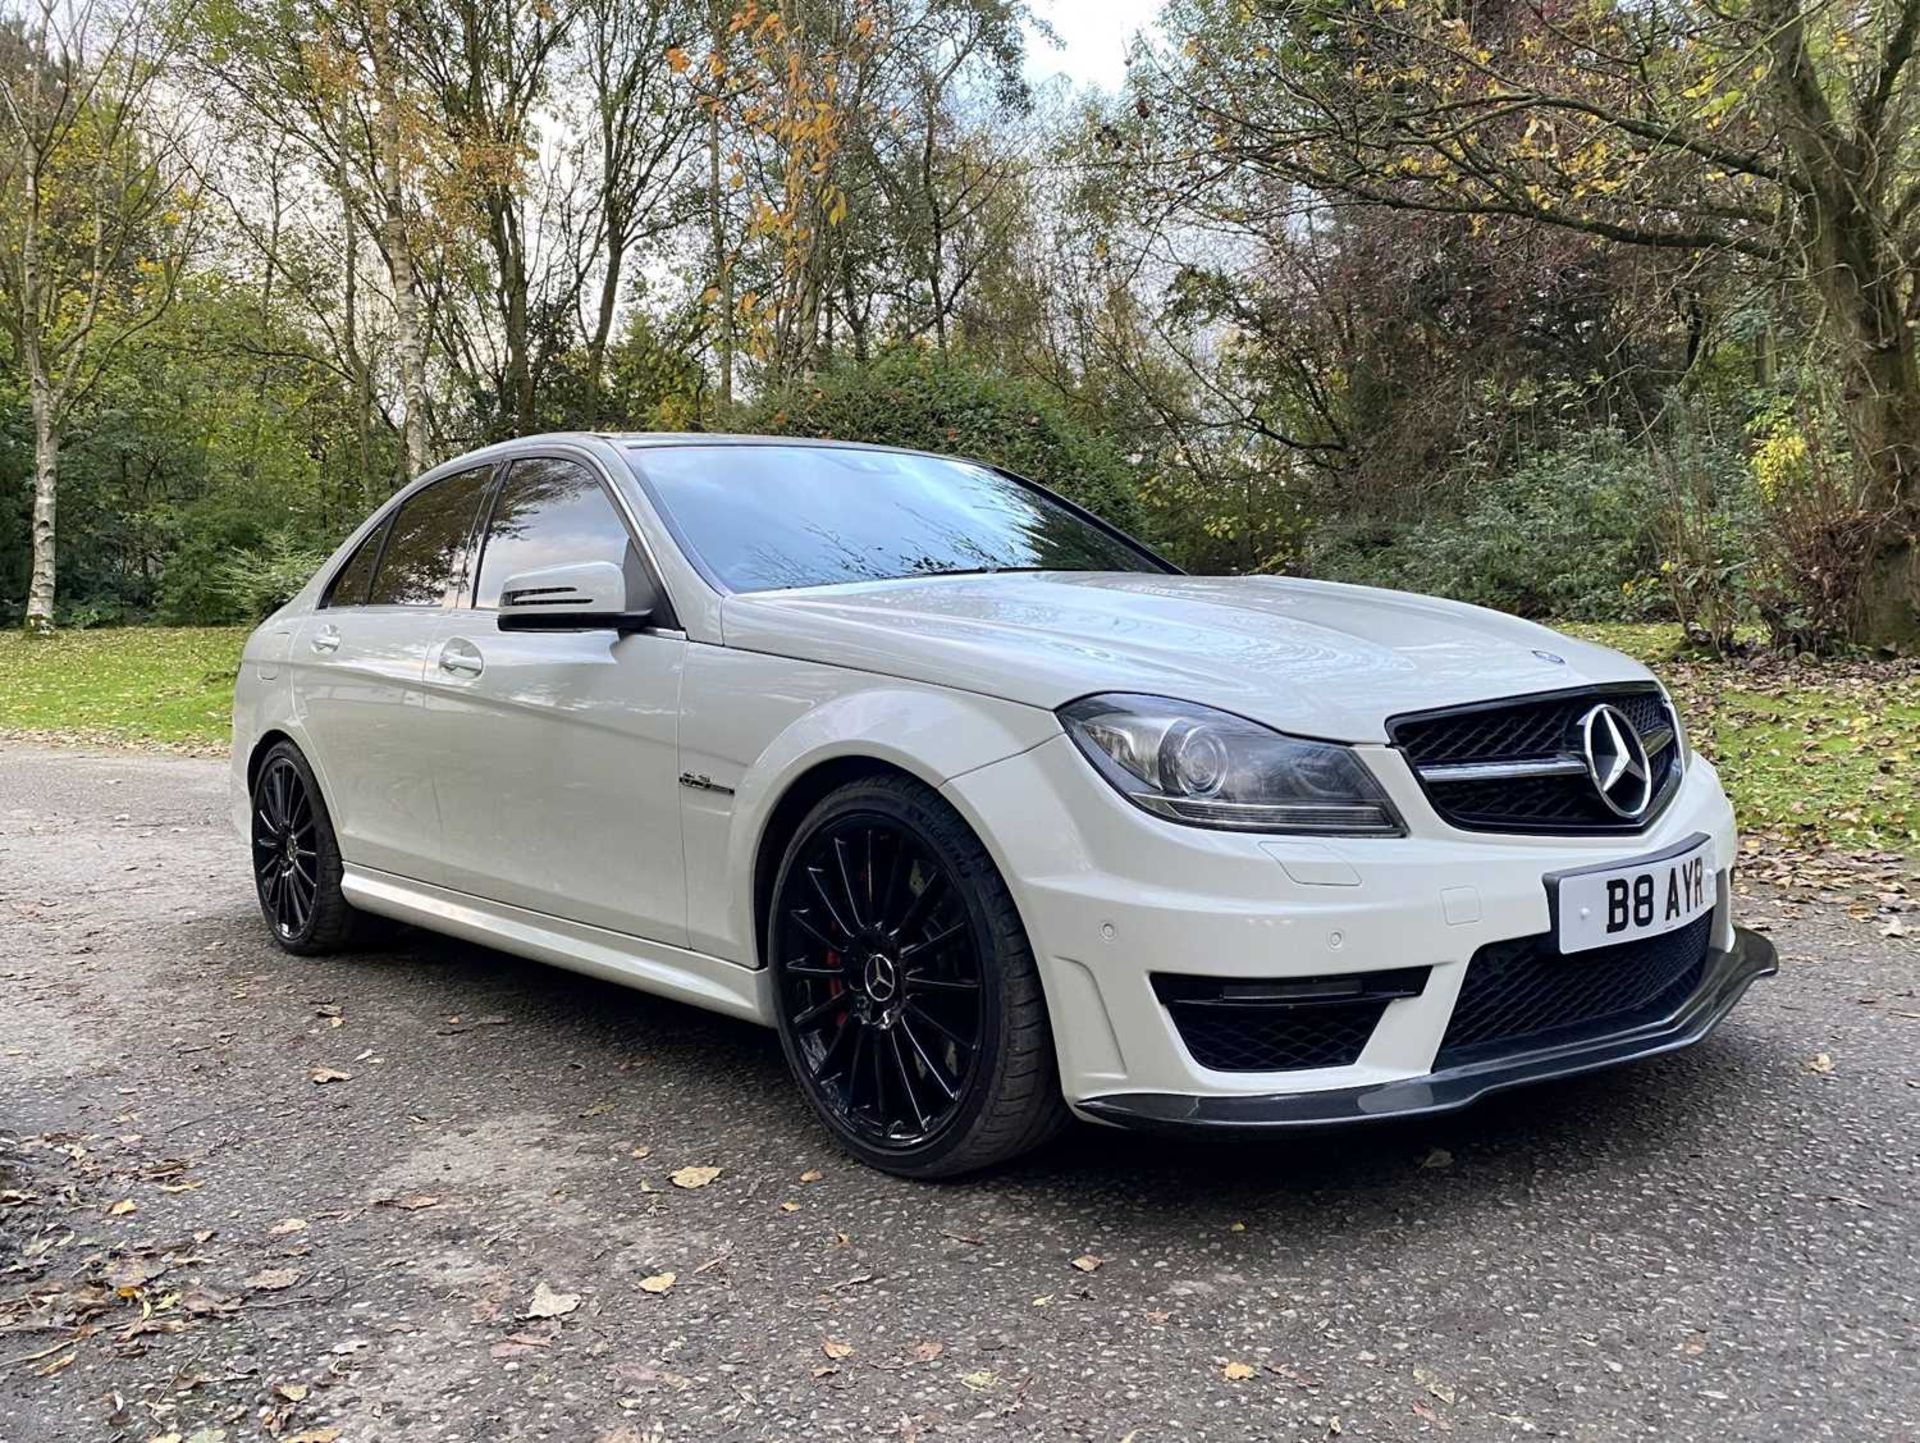 2012 Mercedes-Benz C63 AMG Performance Pack Plus Only 50,000 miles